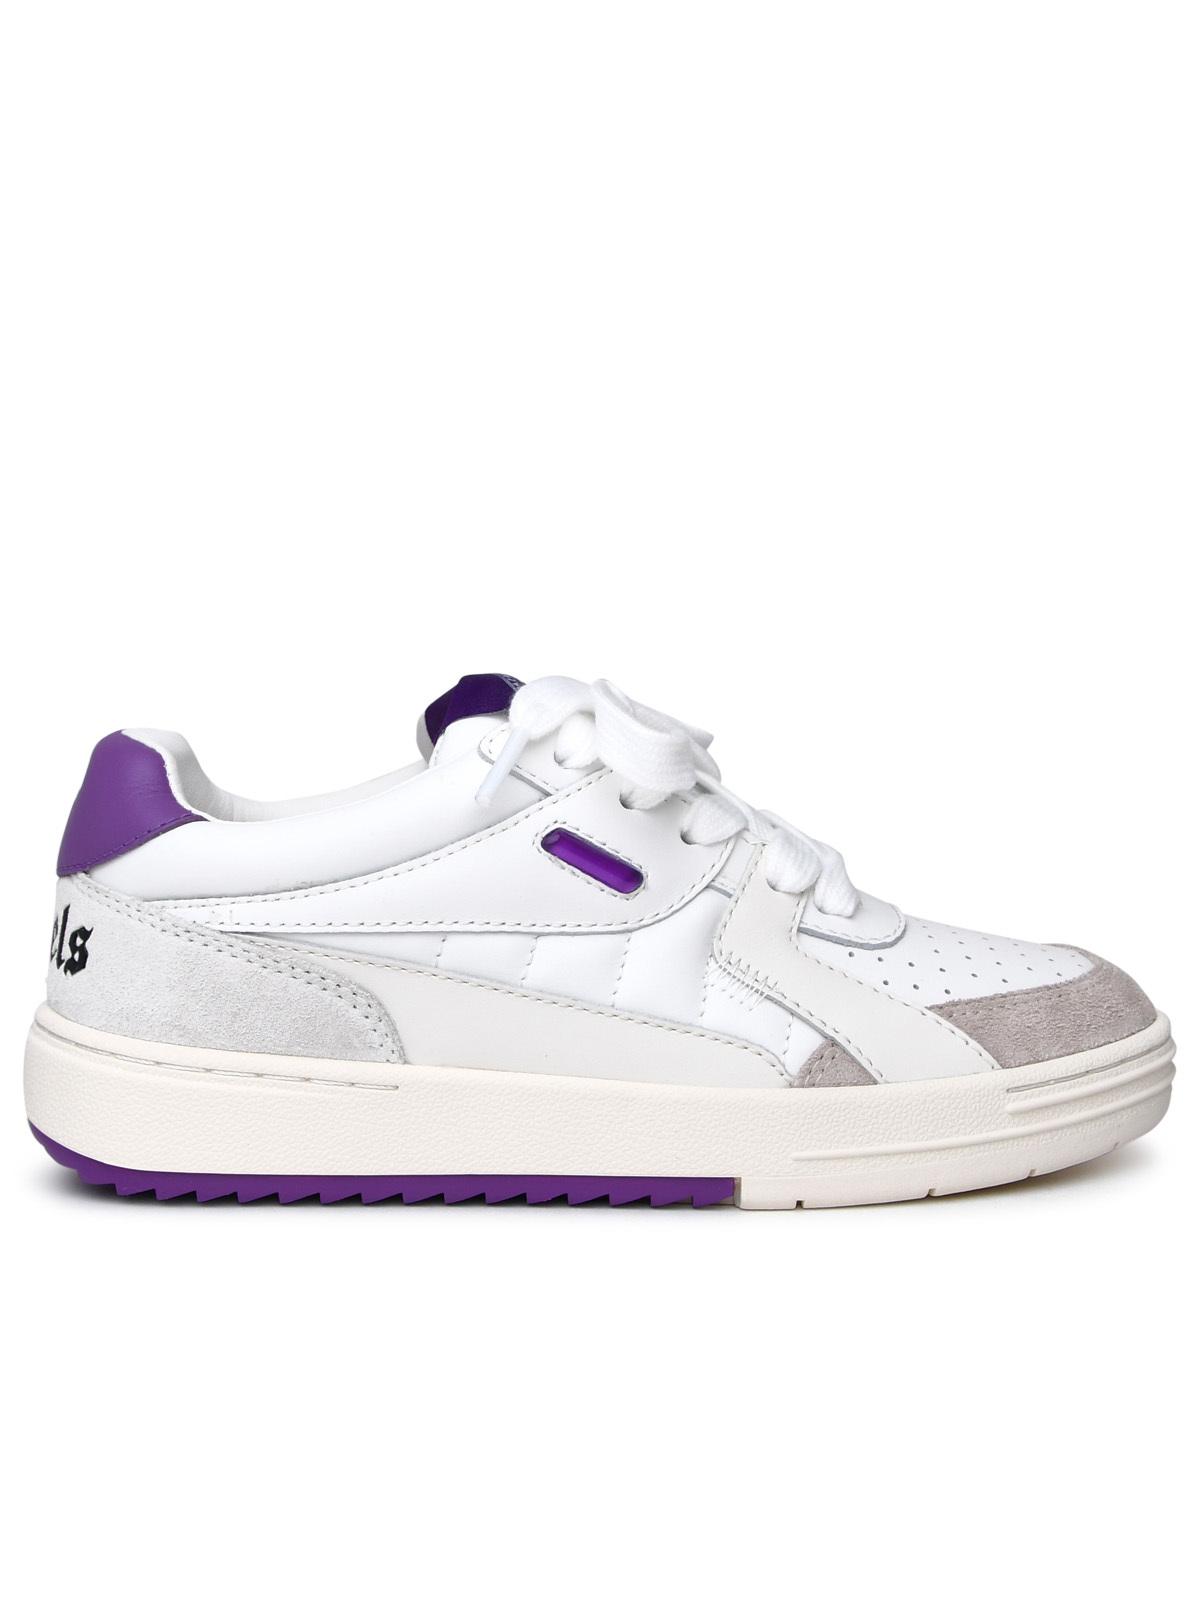 Palm Angels Palm University White Leather Sneakers Woman